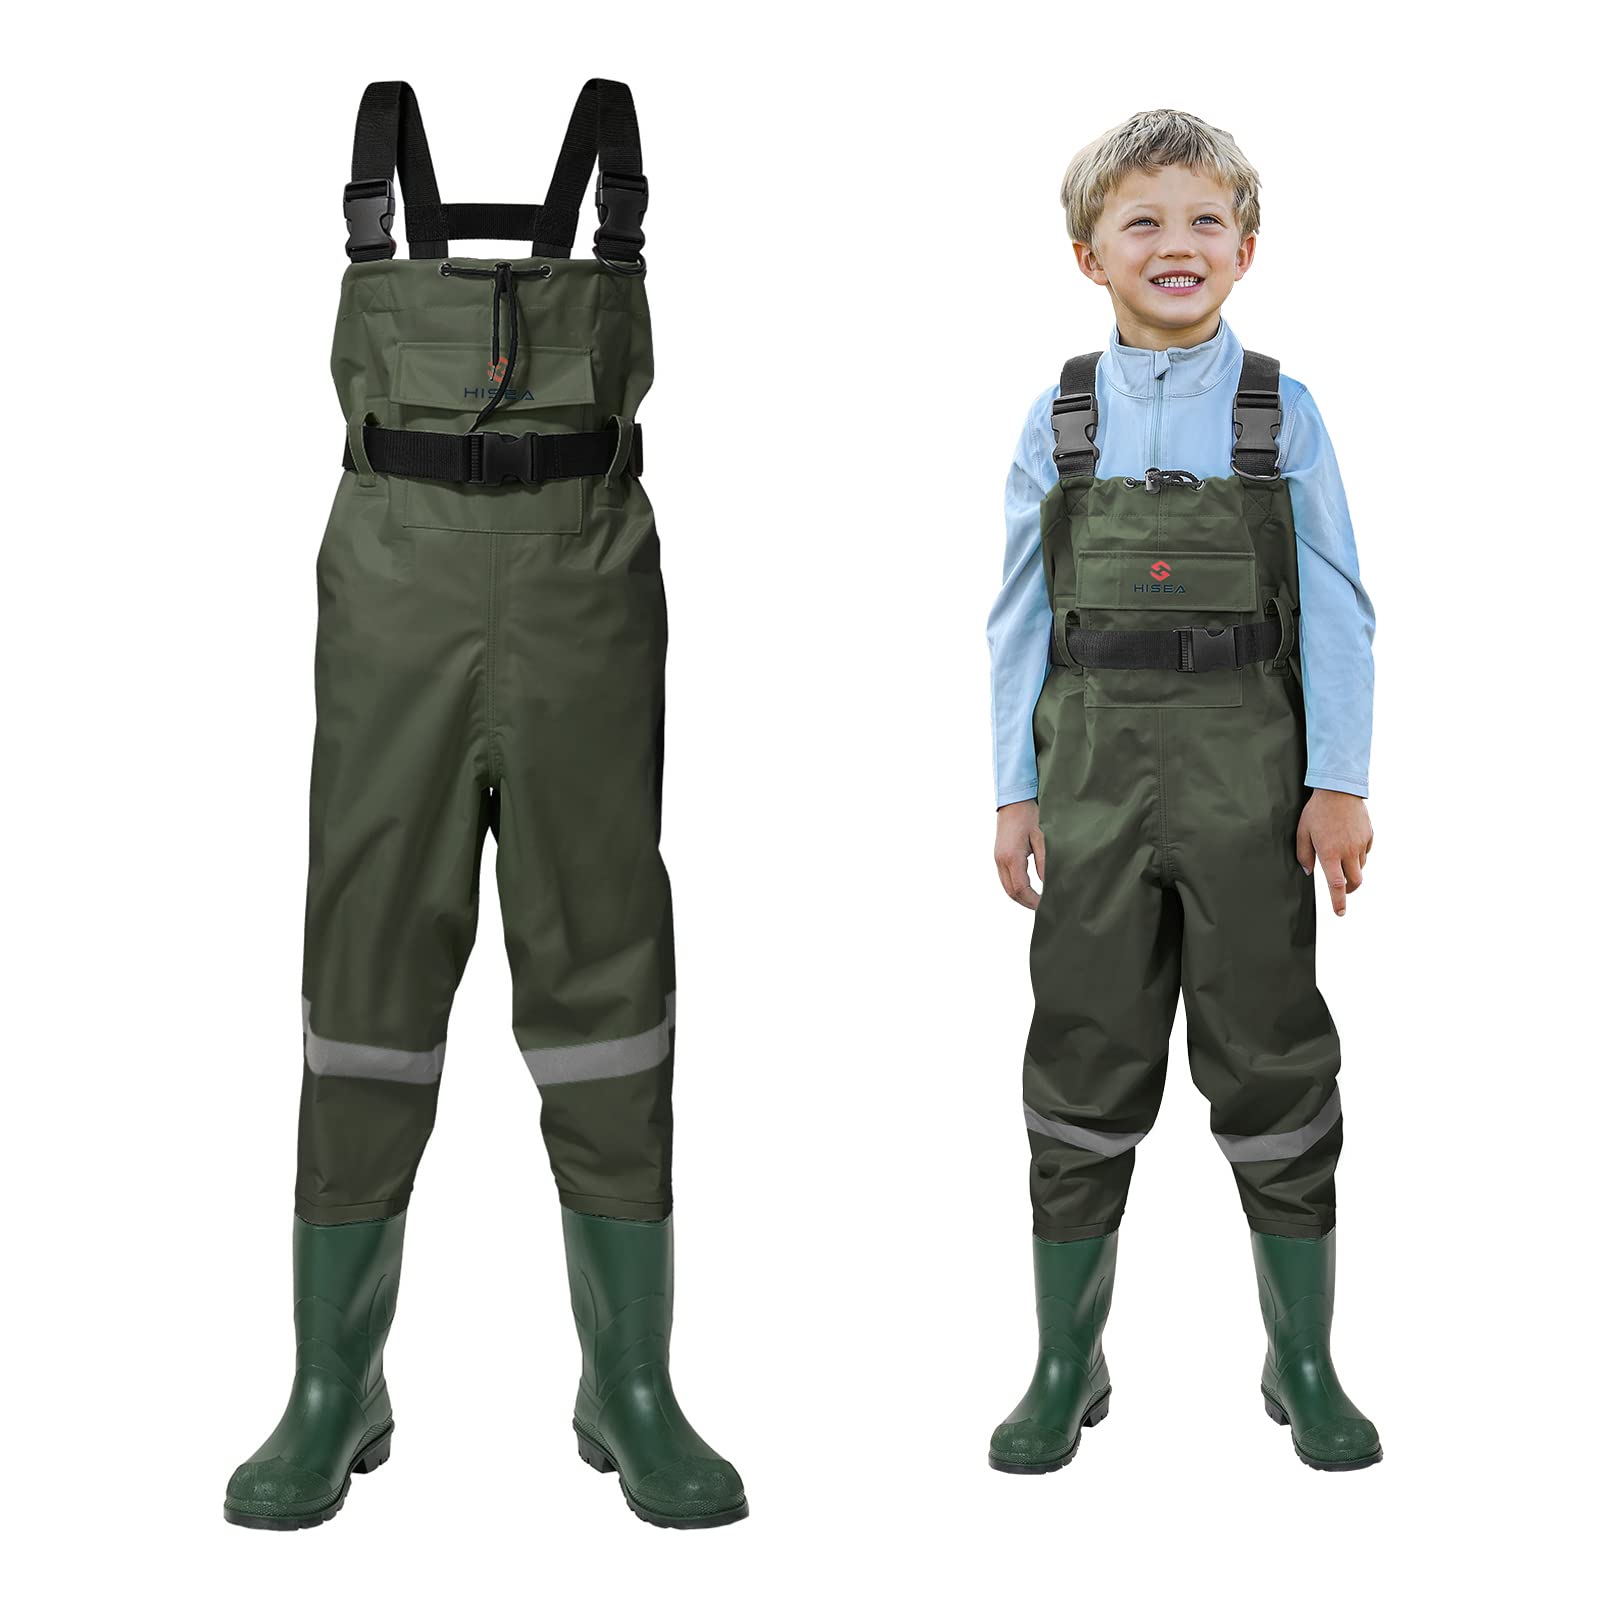 HISEA Kids Chest Waders Youth Fishing Waders for Toddler Children